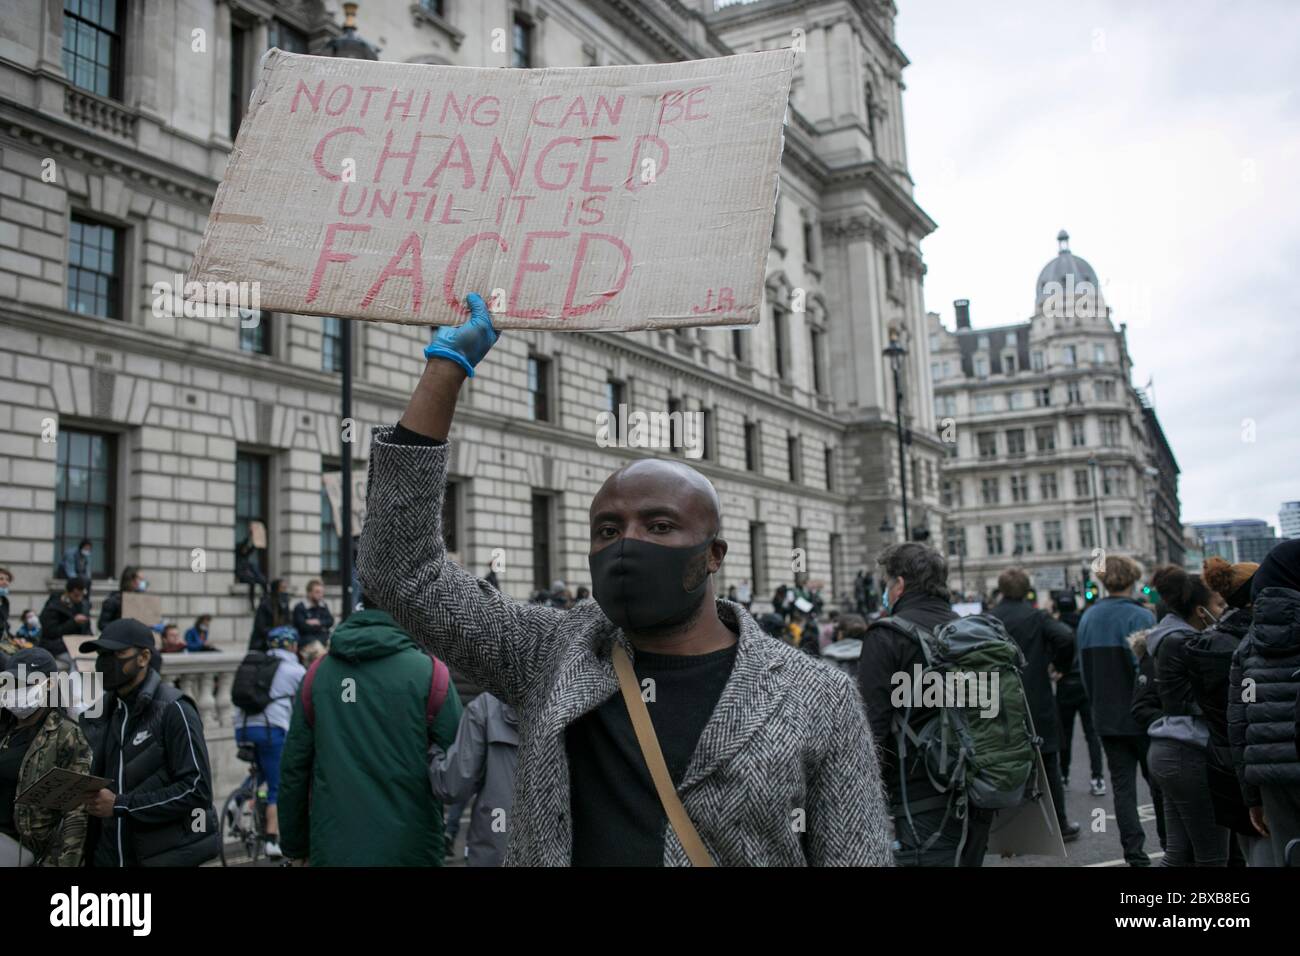 A protester walks past institutional buildings in central London holding a placard against systemic racism in the UK. Stock Photo